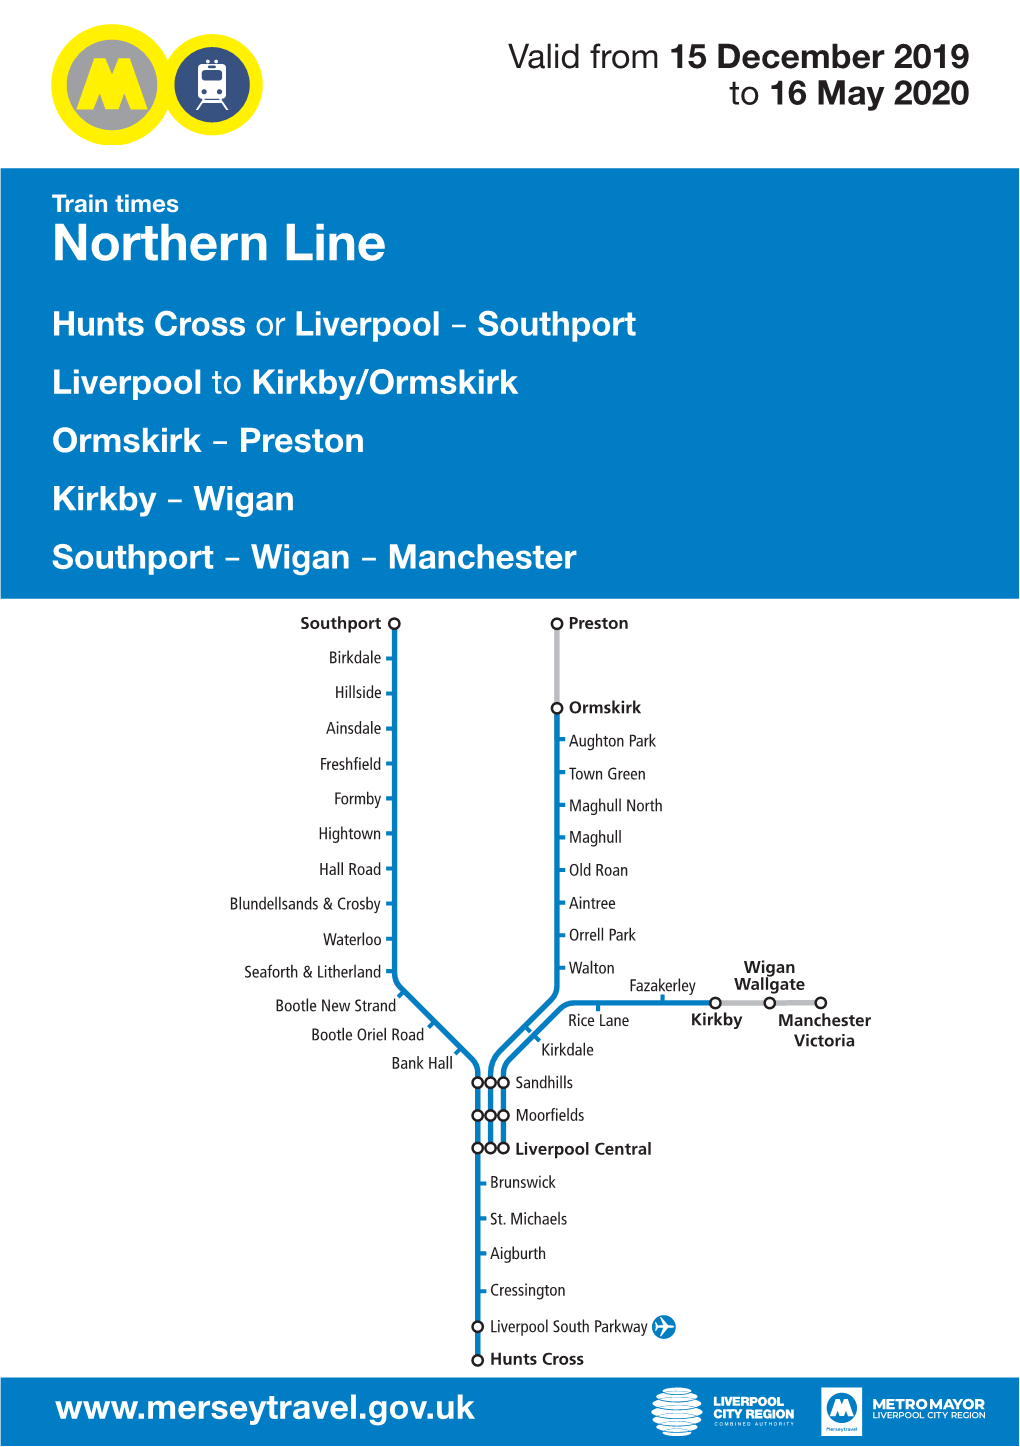 Northern Line Cover (May 20) Rail Covers 04/11/2019 15:54 Page 1